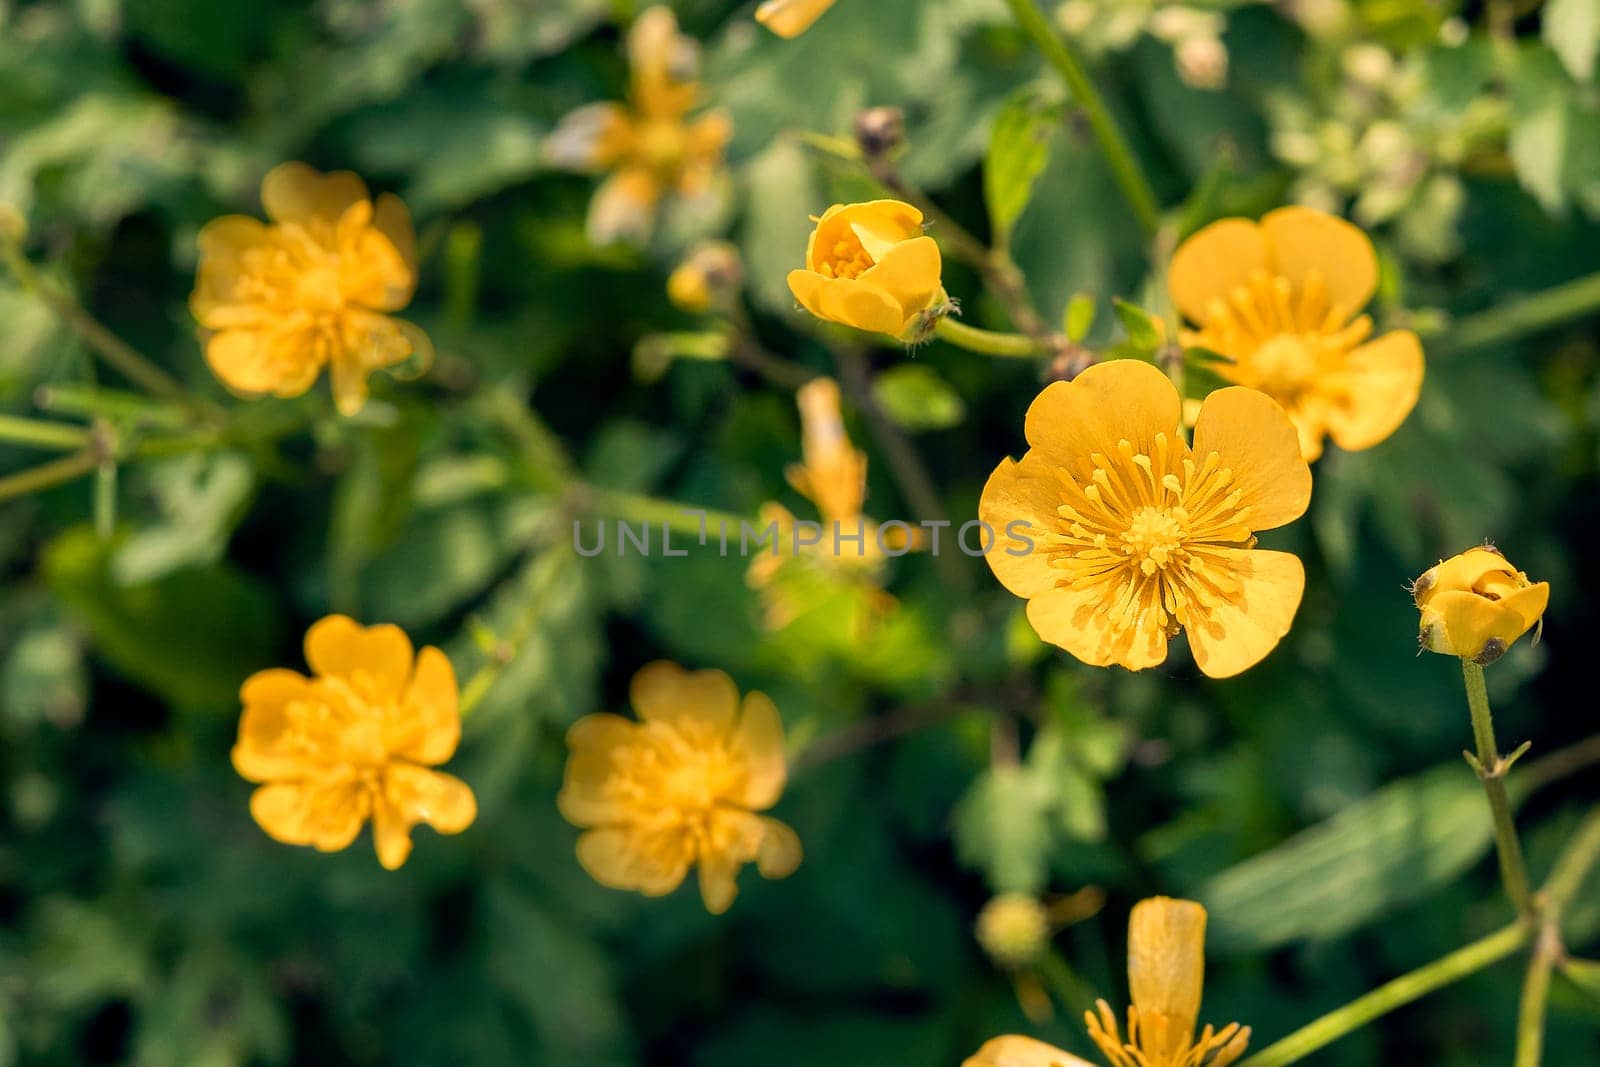 Field of yellow flowers and green grass defocus, in the foreground is a yellow flower. by Annavish